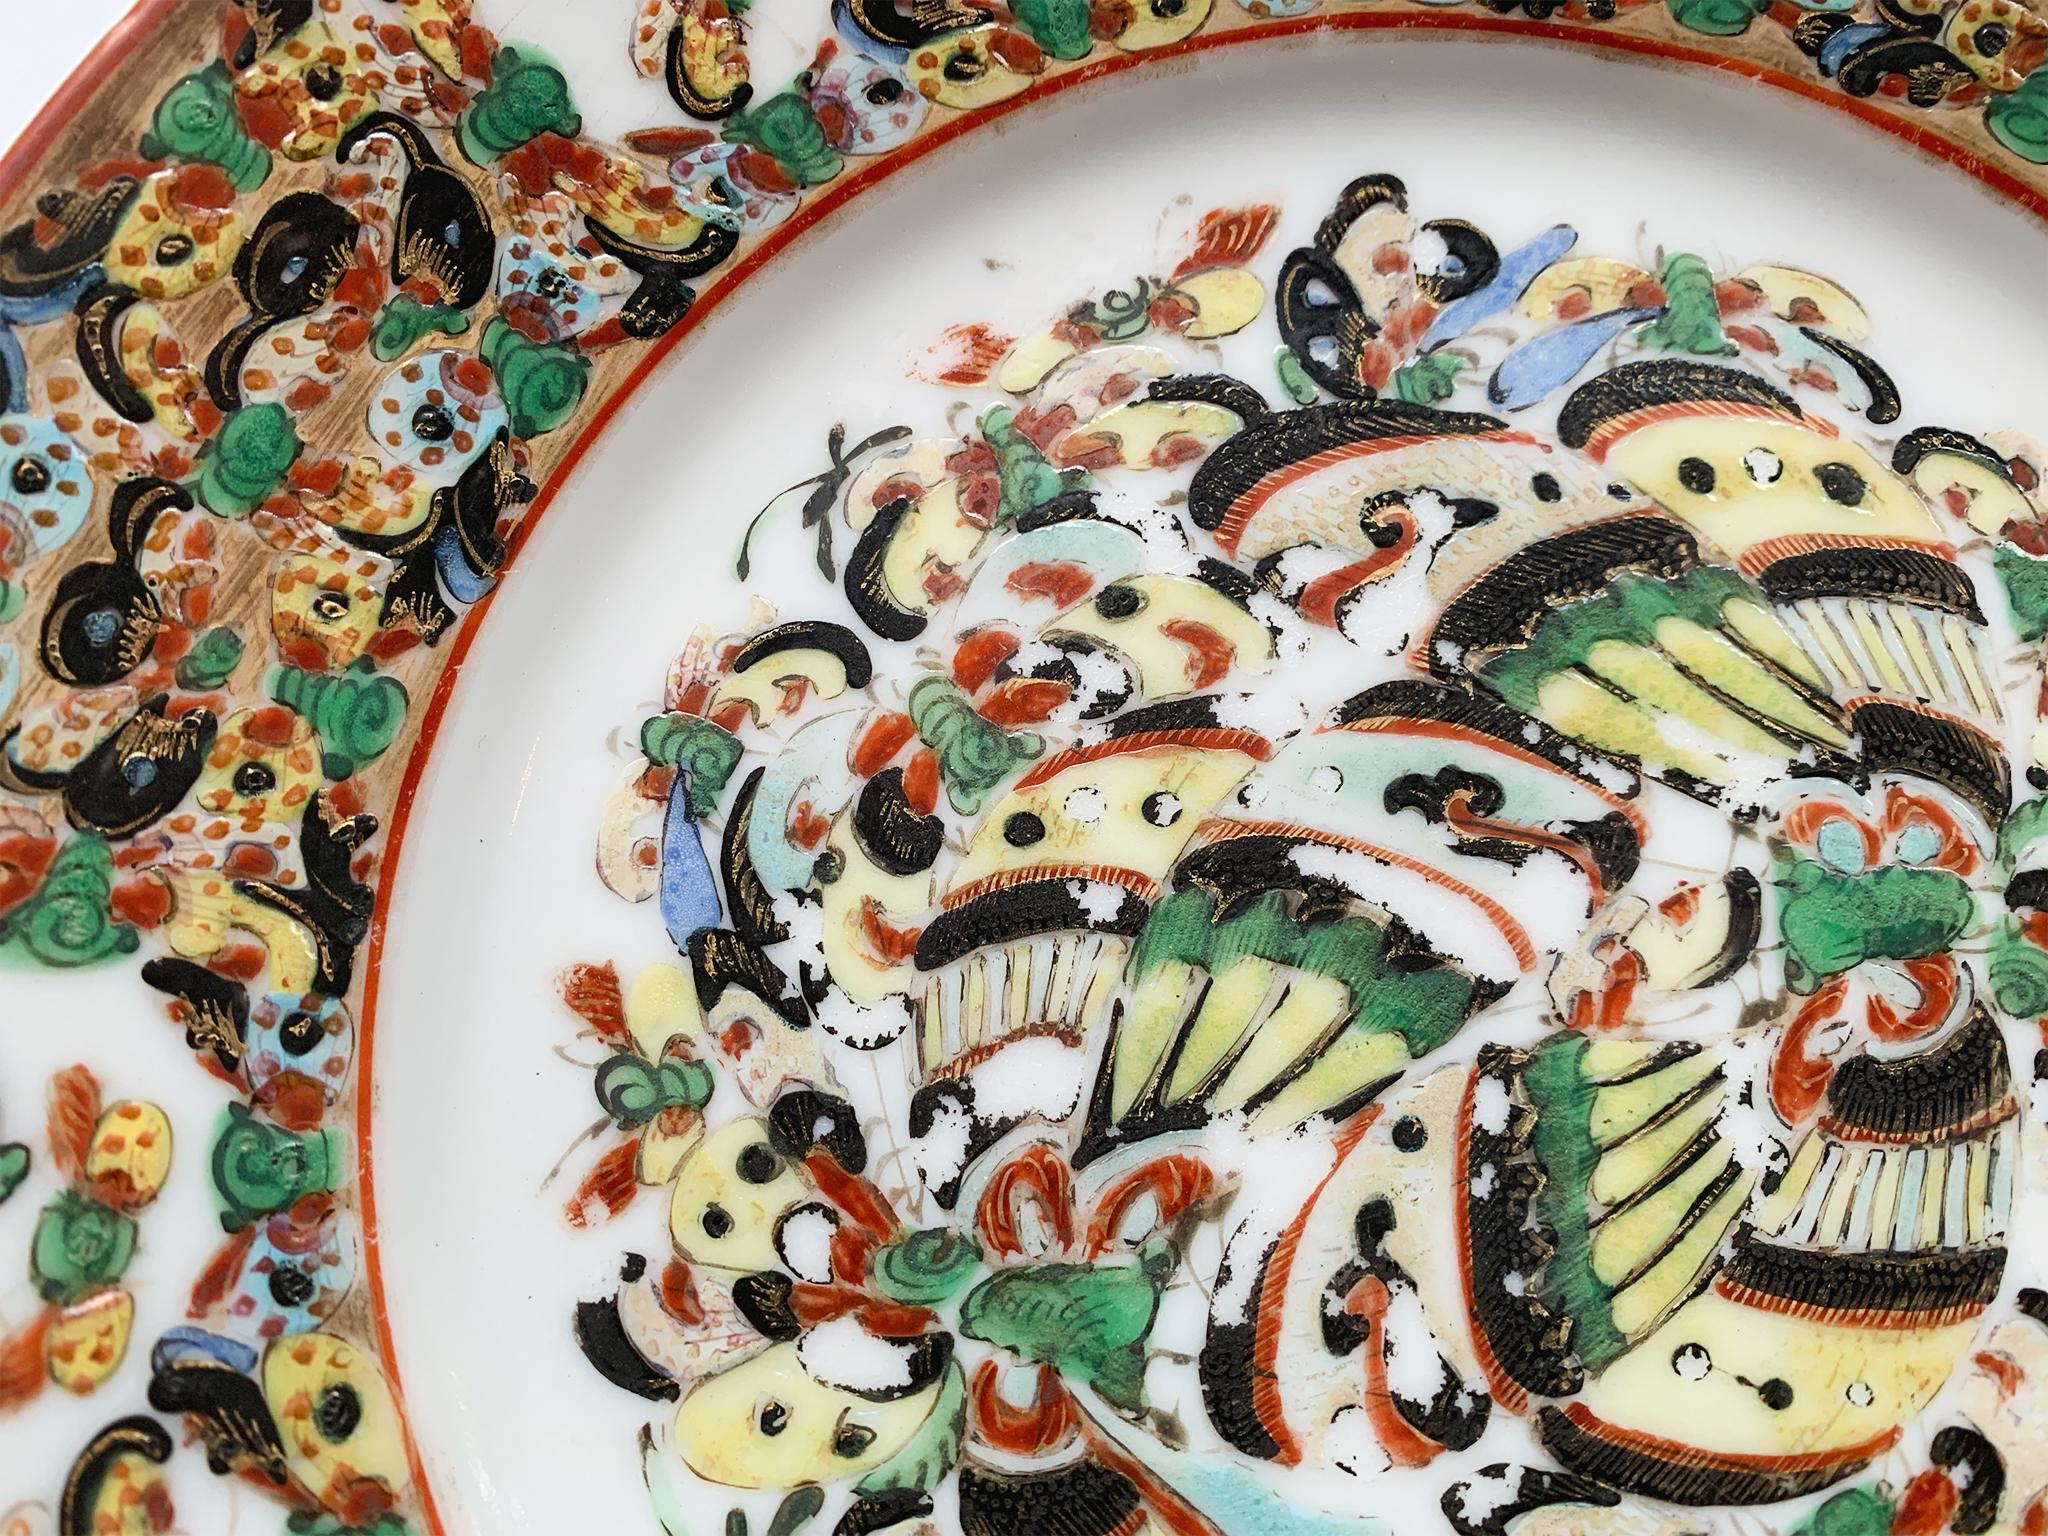 Enamel 20th Century Chinese Decorative Plates, a Set of 6